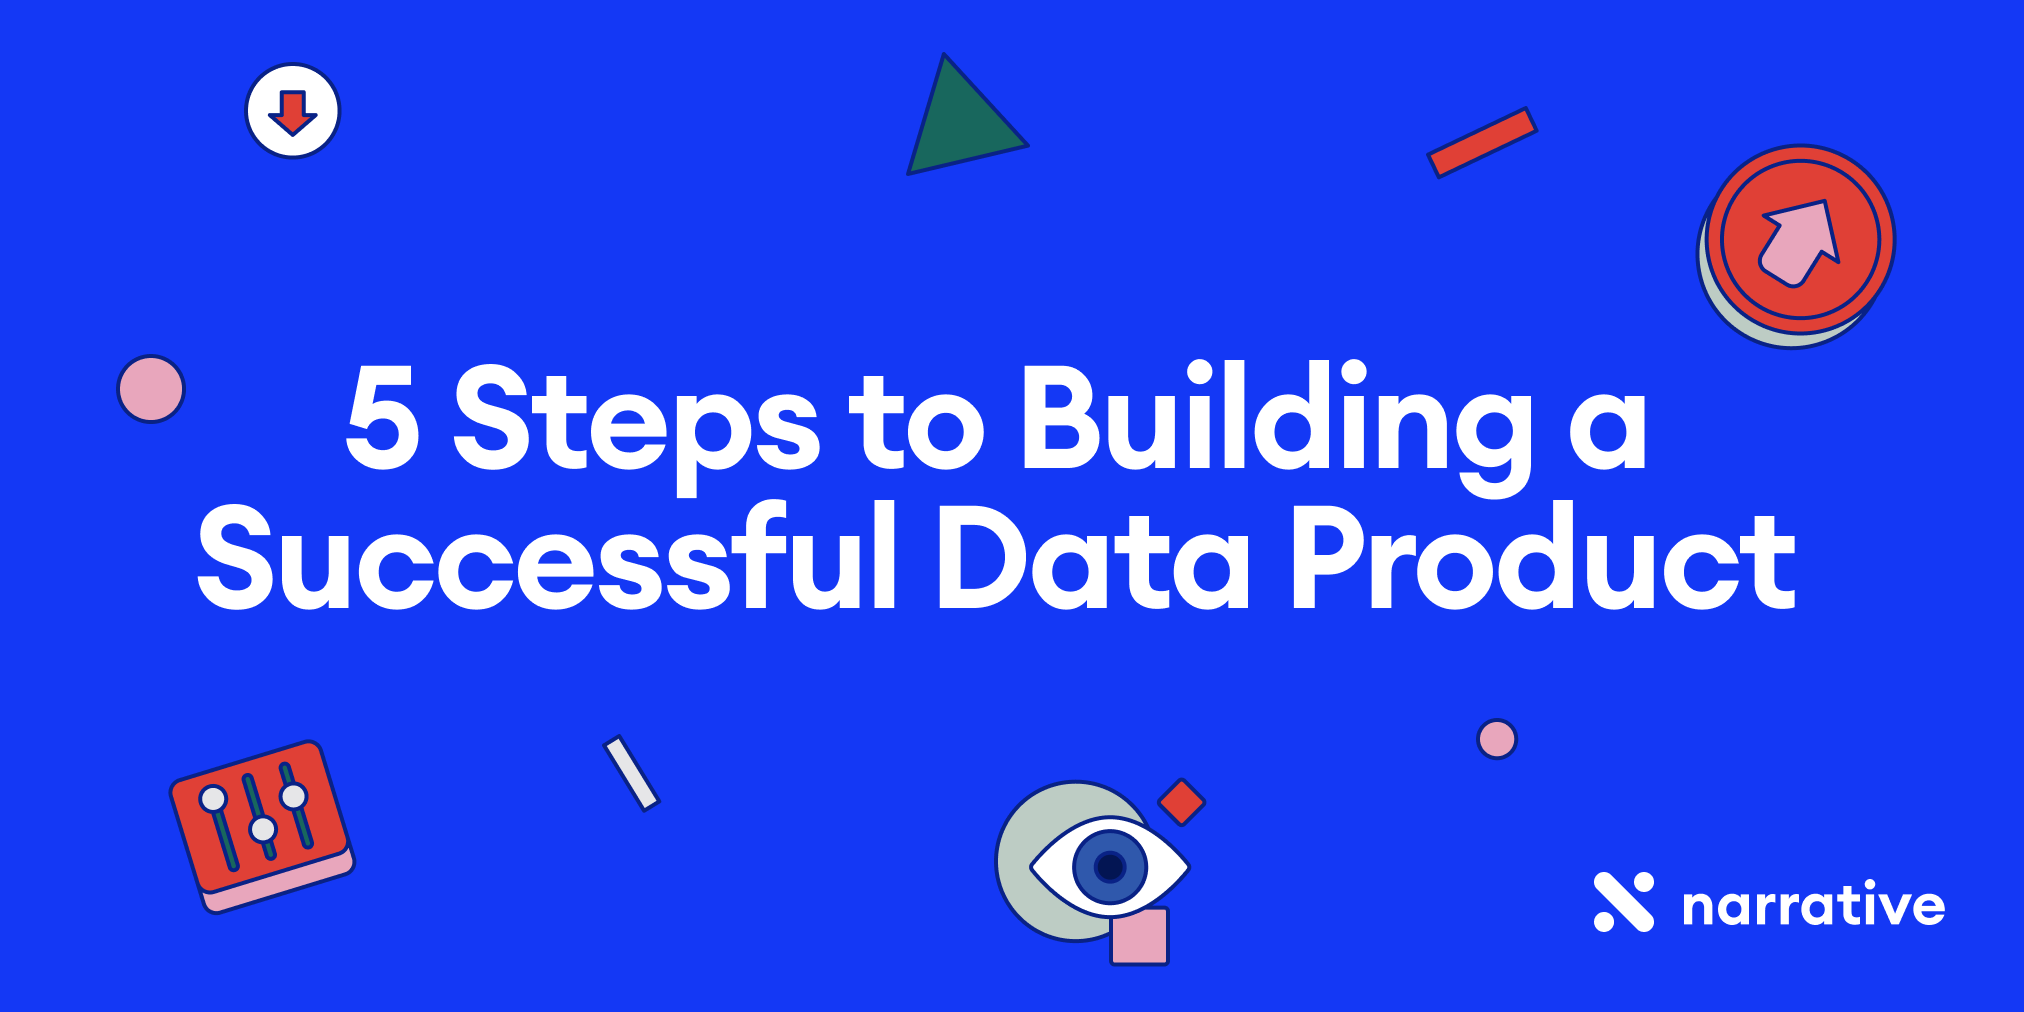 5 Steps to Building a Successful Data Product